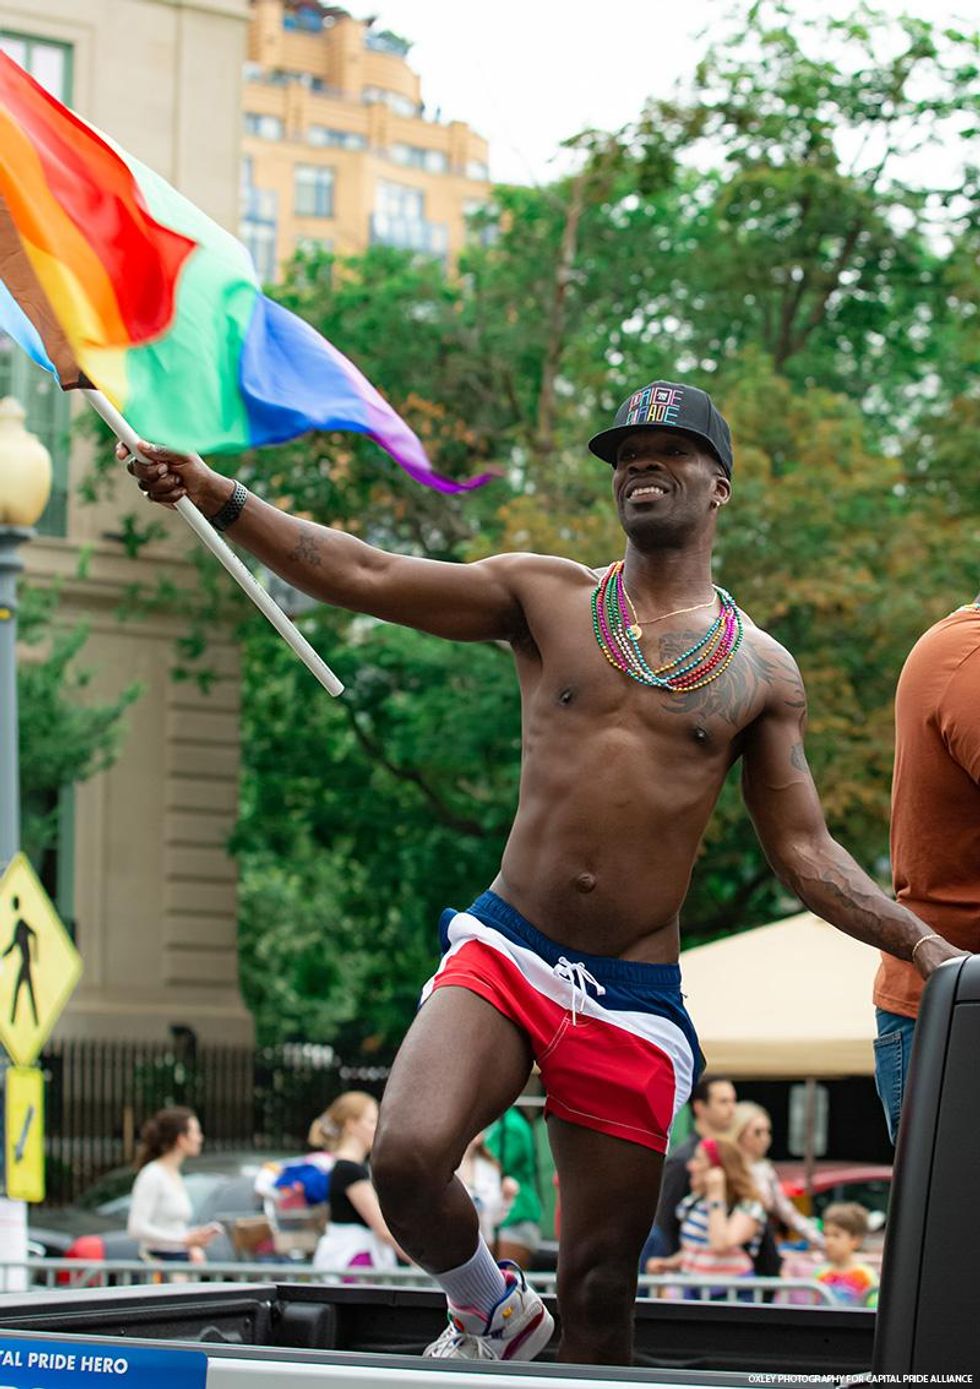 88 Photos of Queer Joy From the Washington, D.C. Capital Pride Parade